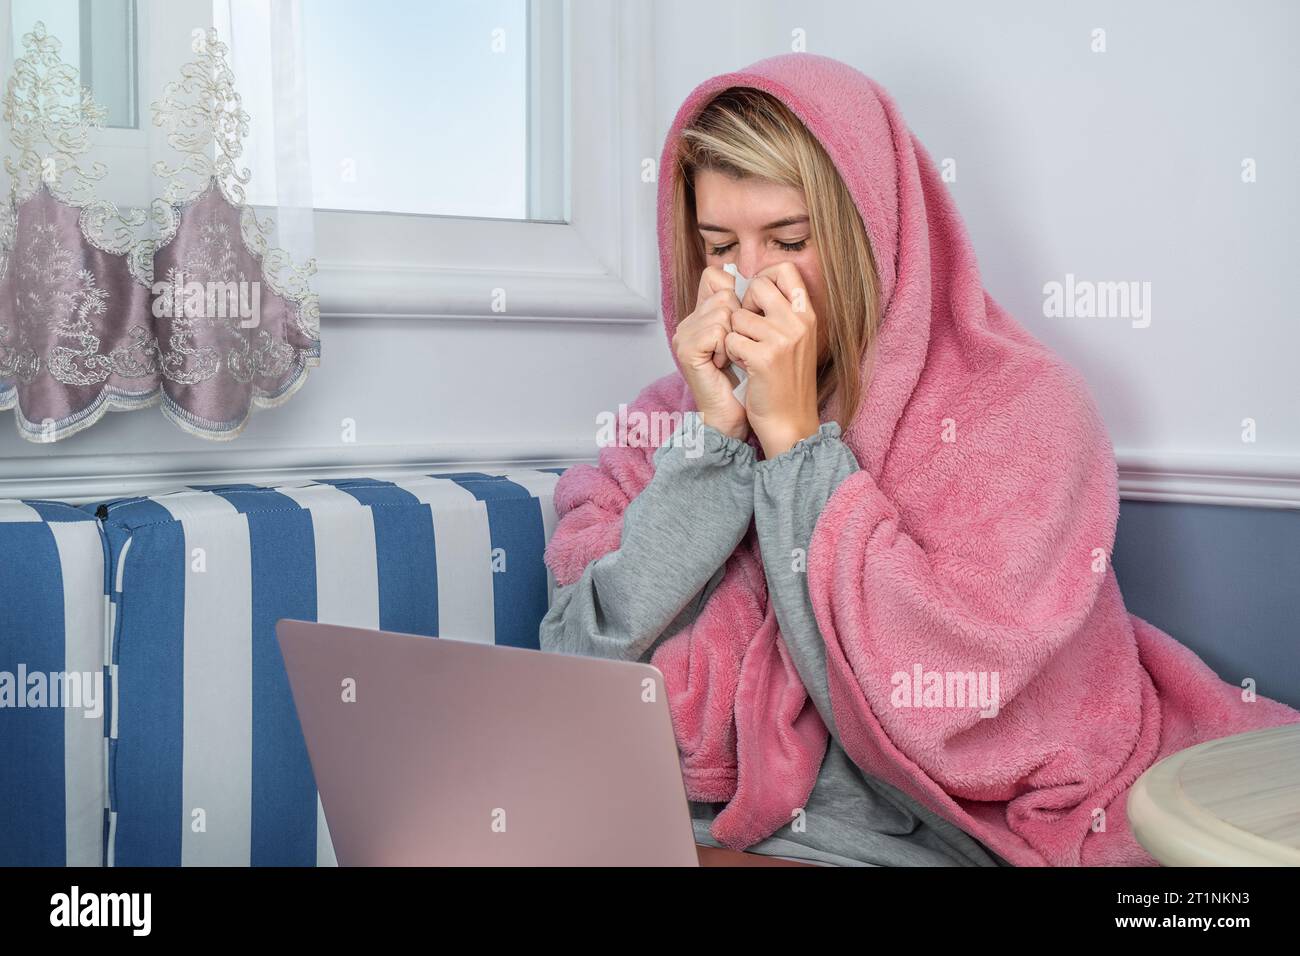 A girl sneezes wrapped in a blanket and uses a laptop at home Stock Photo